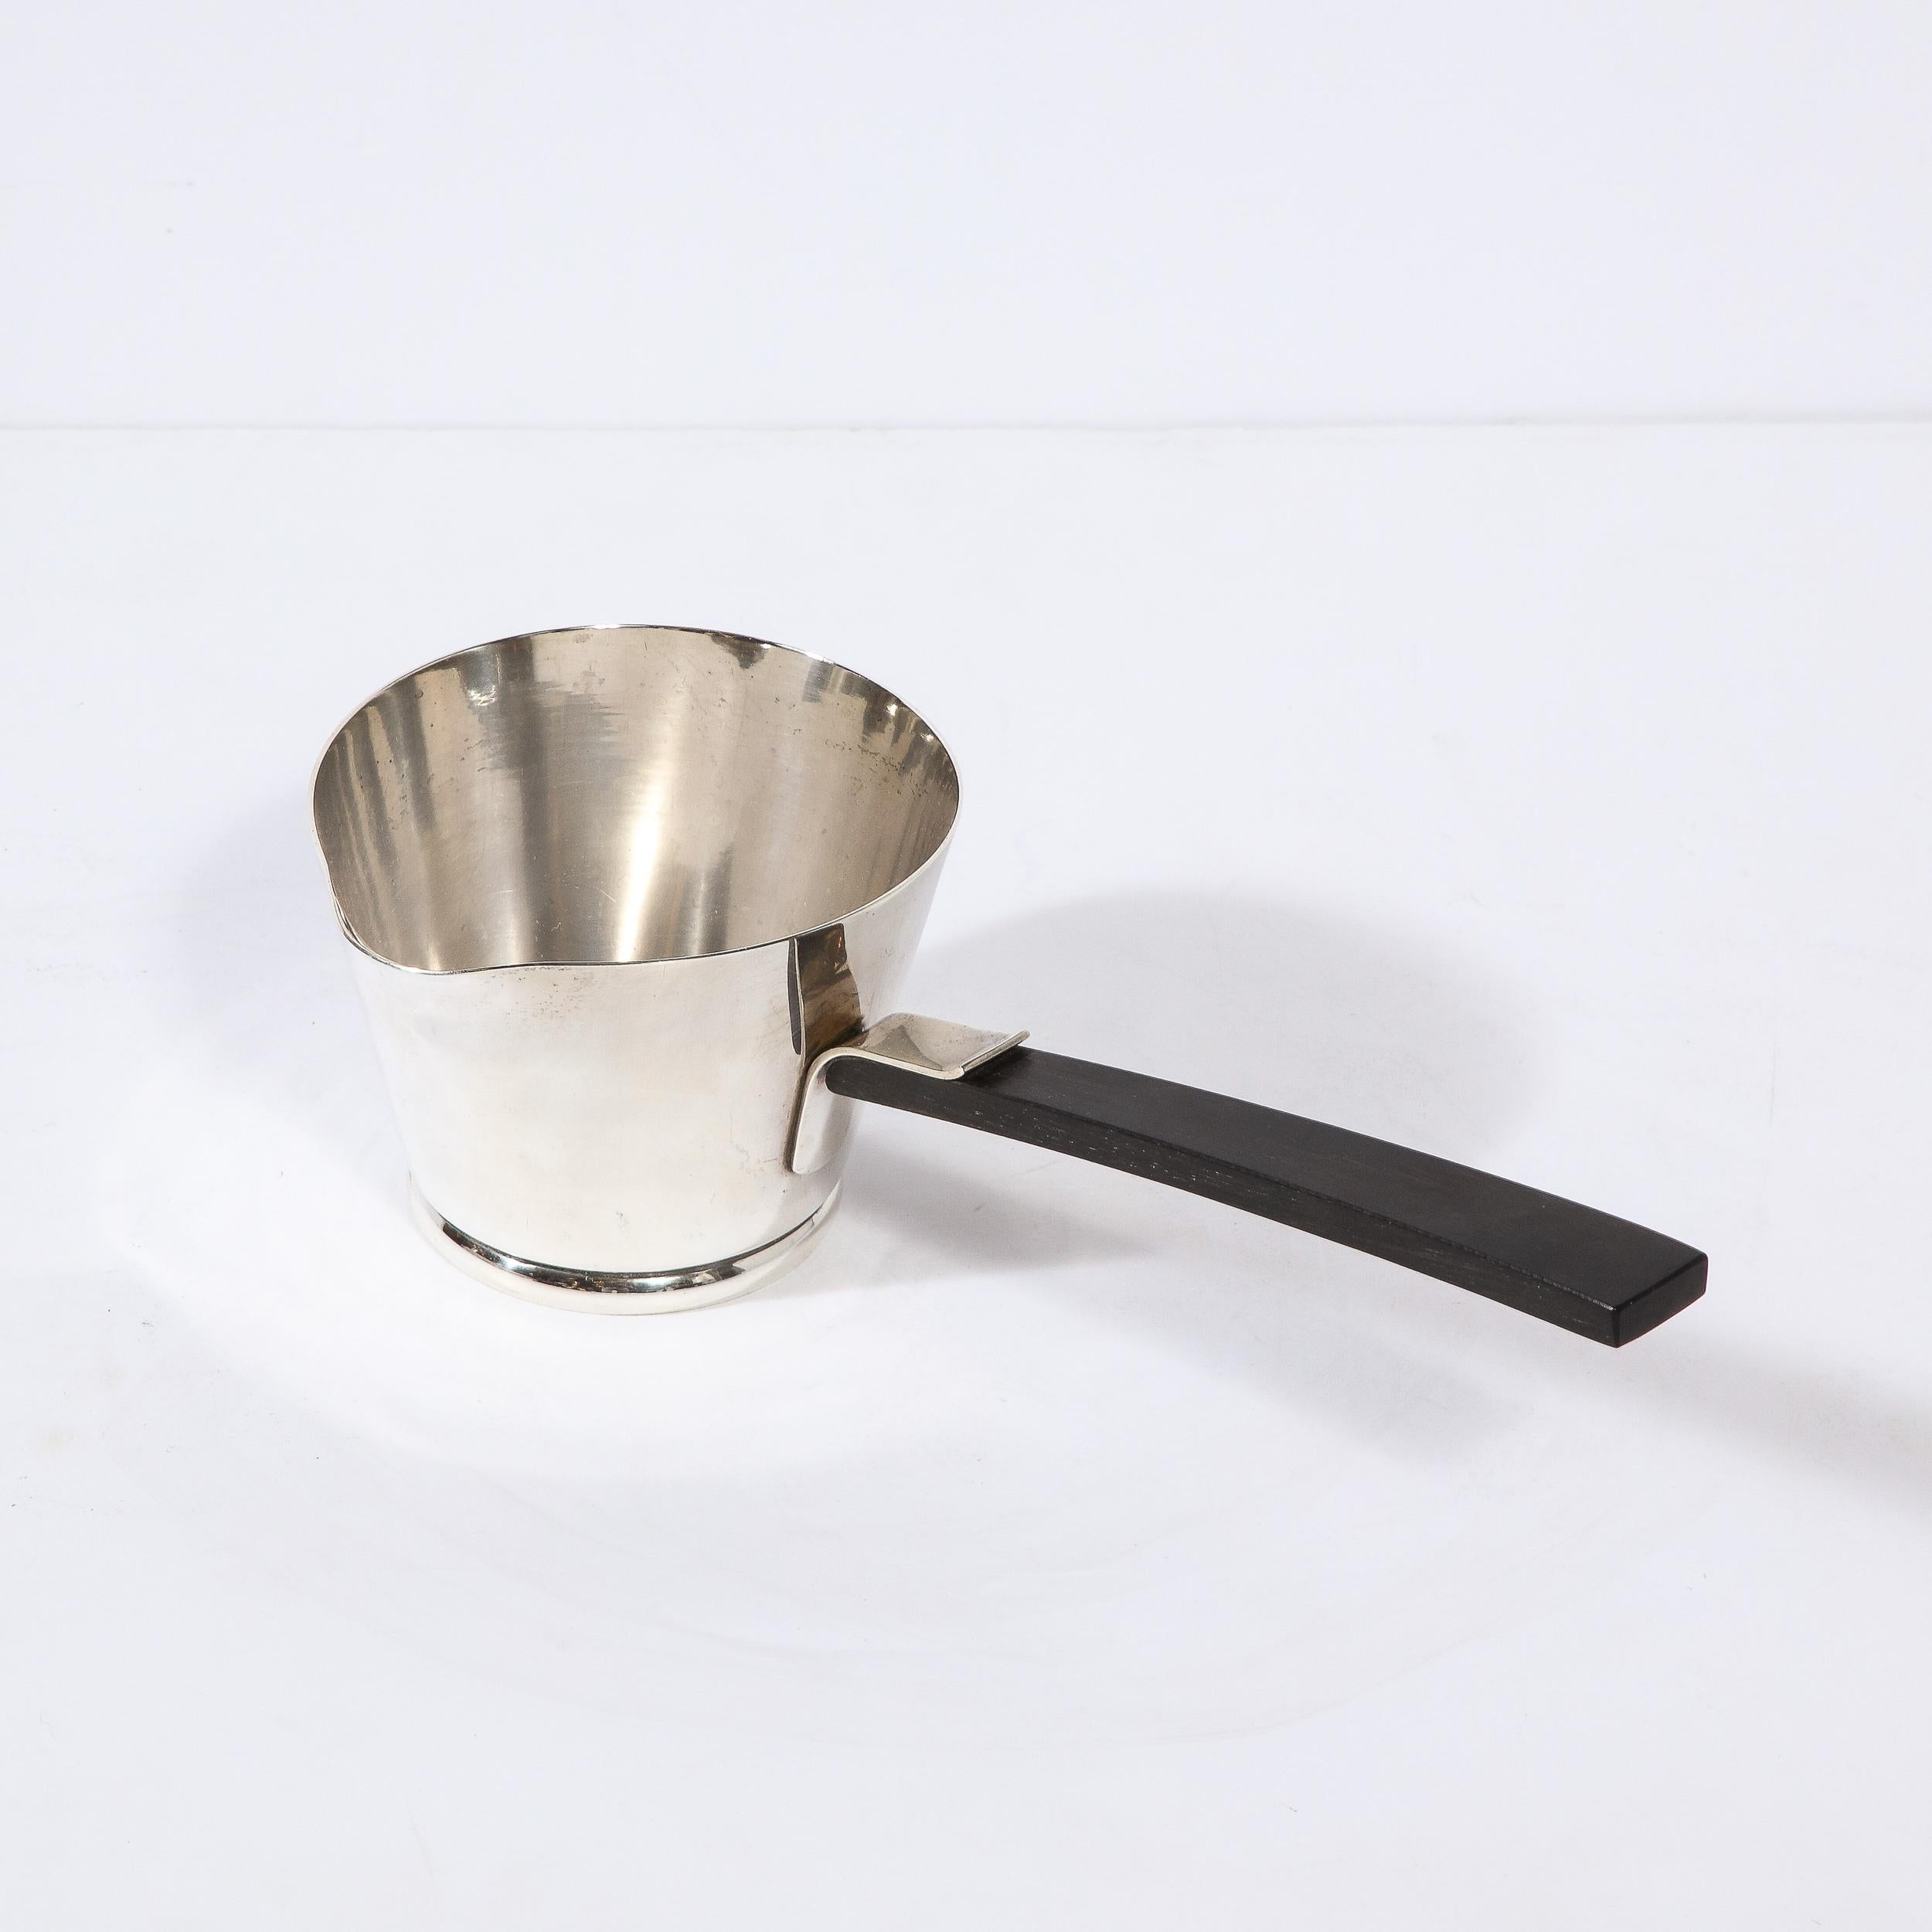 Mid-20th Century Modernist Sterling Silver Sauce Boat with Ebony Handle by Allan Adler For Sale